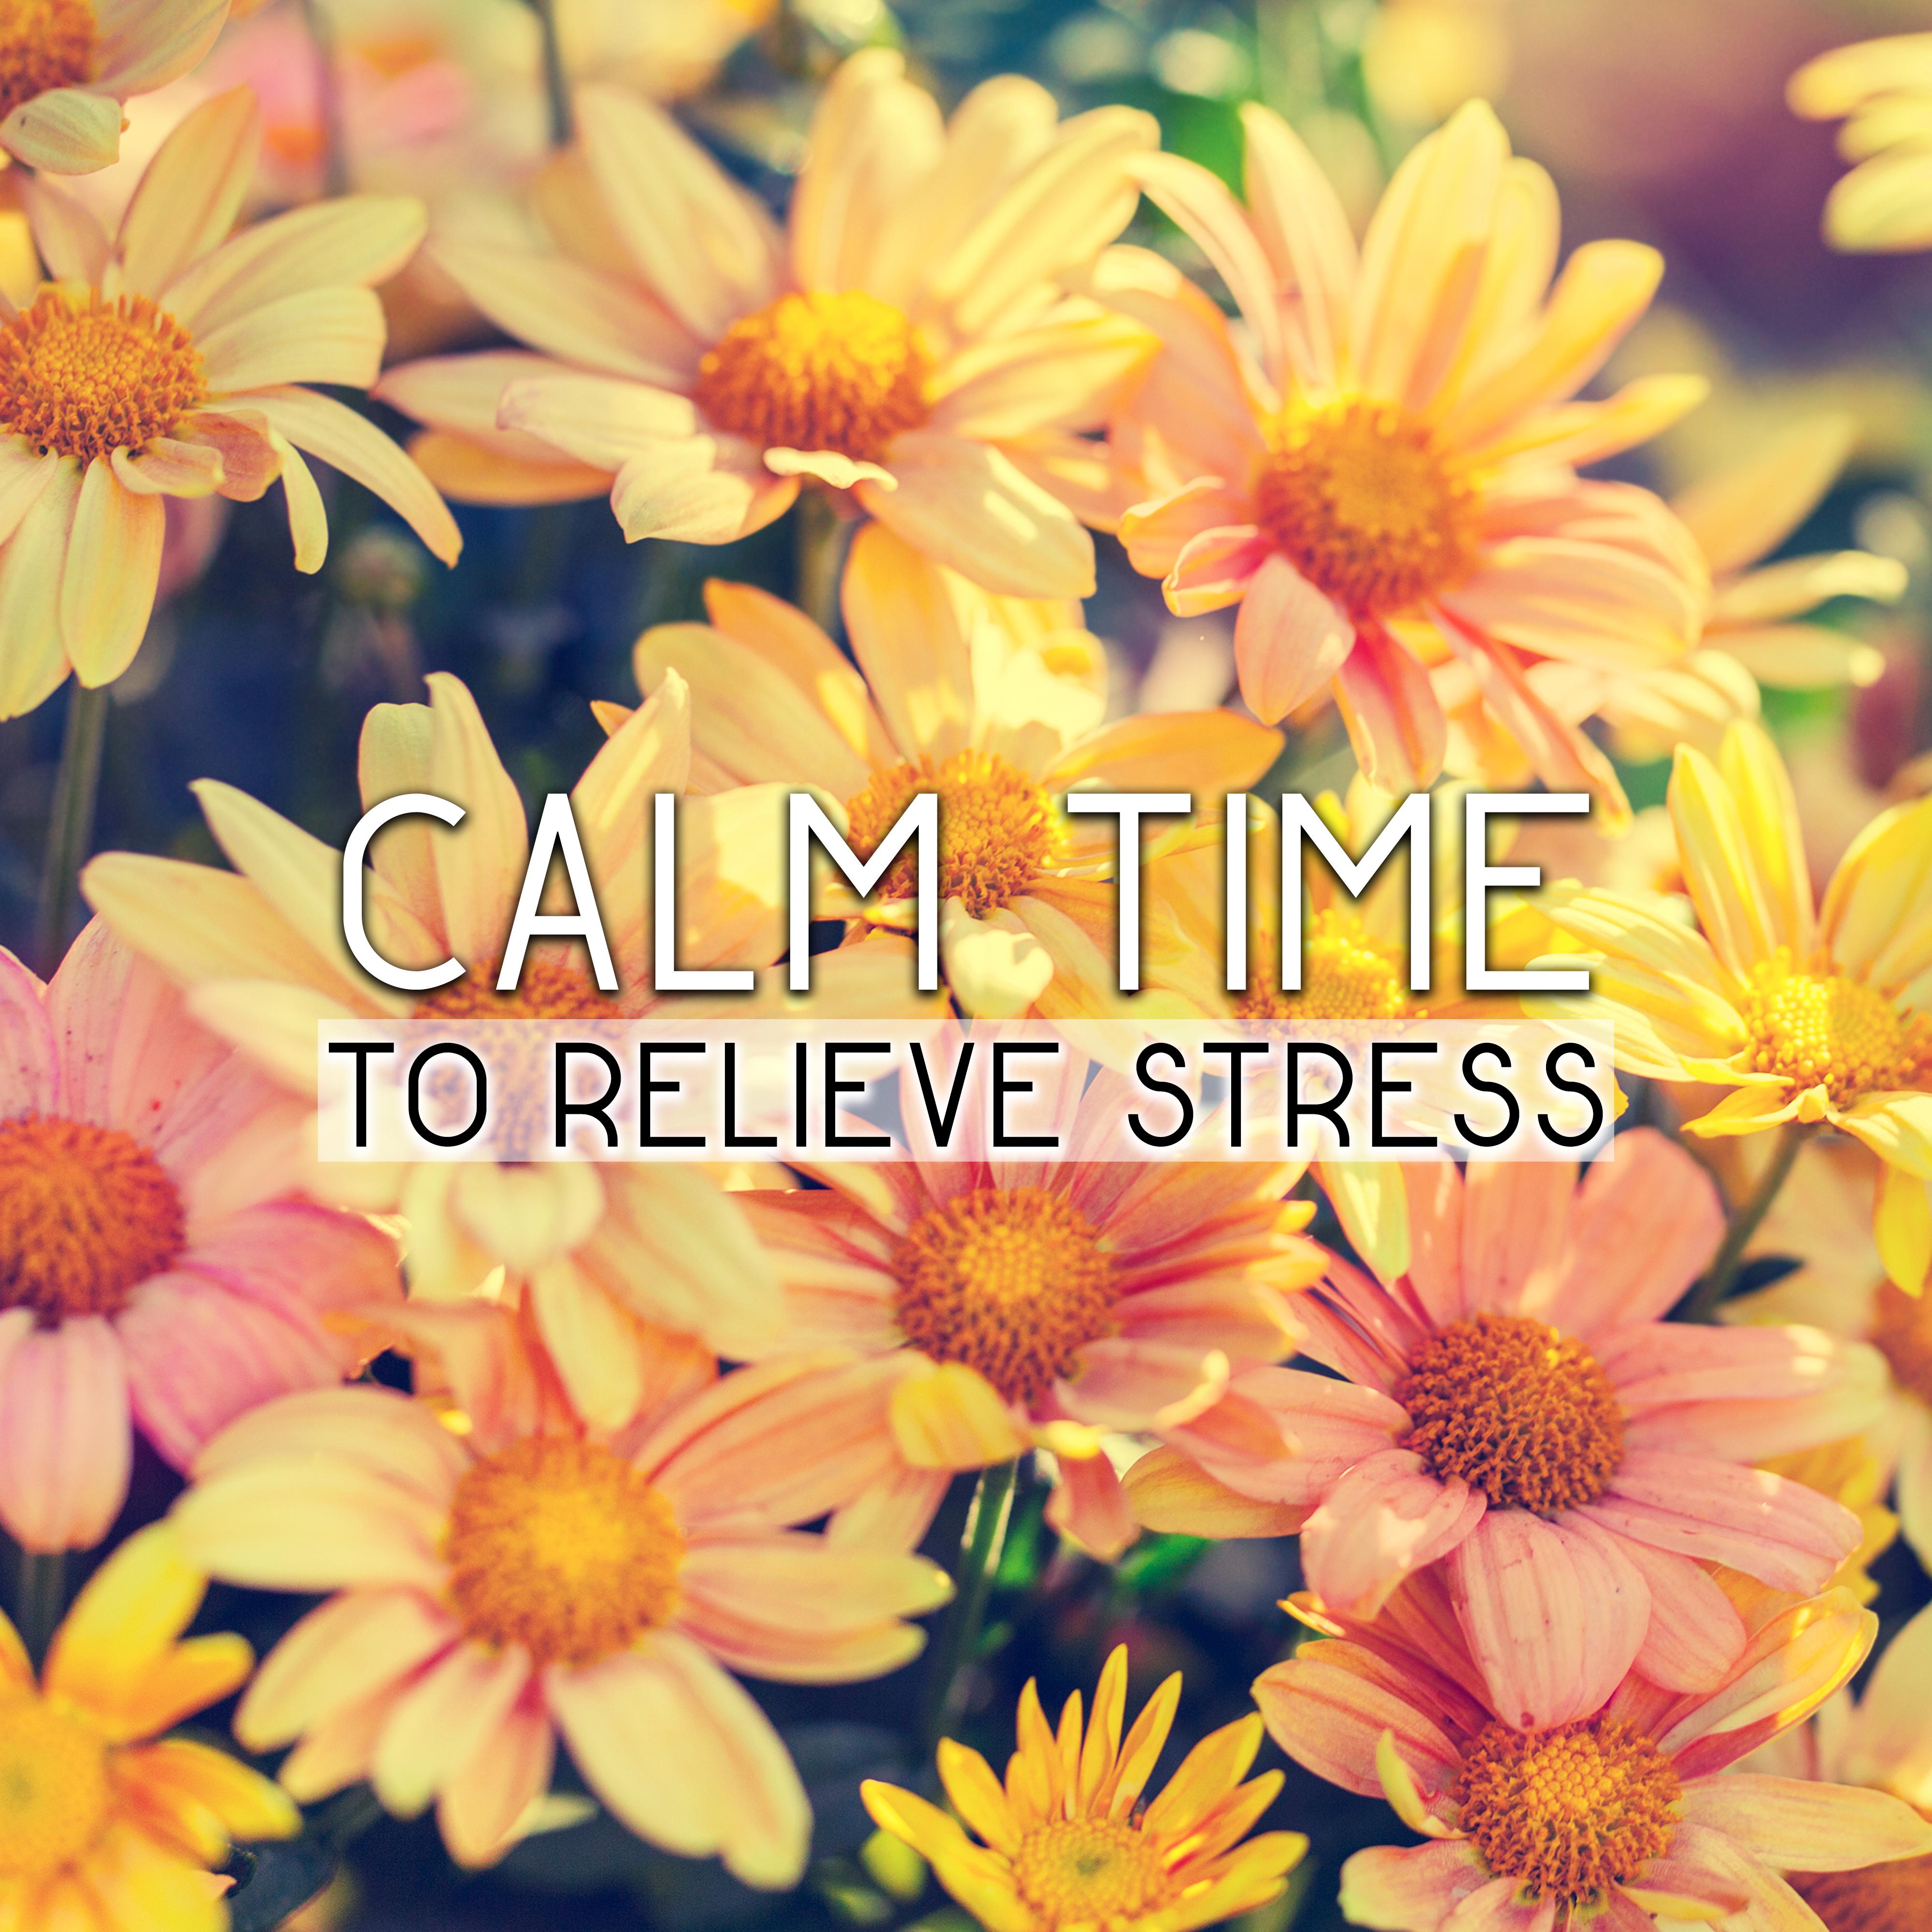 Calm Time to Relieve Stress – Chilled Piano Music, Sounds to Calm Down, Easy Listening, New Age Rest